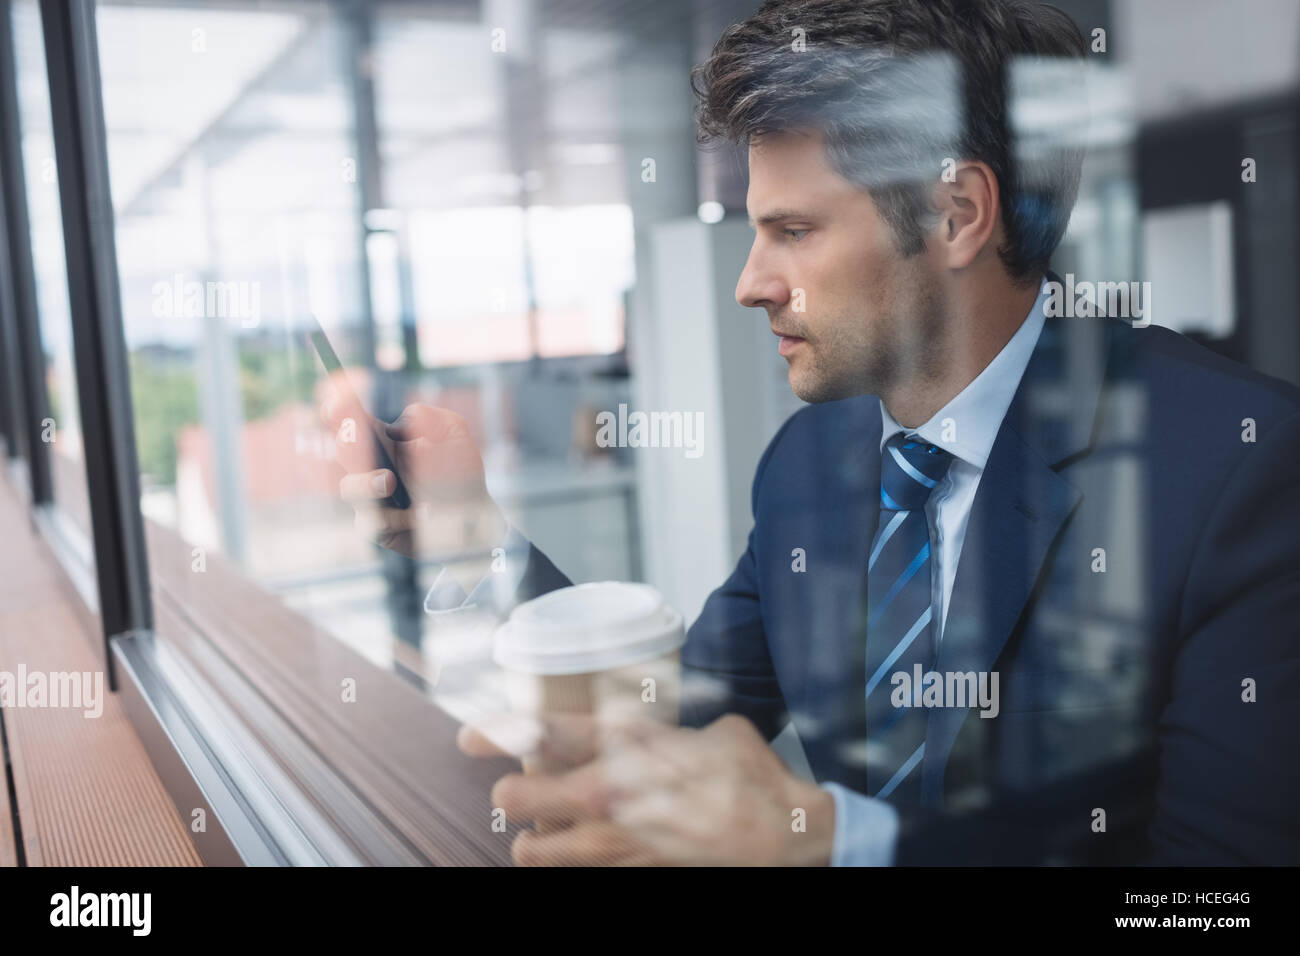 Businessman using mobile phone and holding disposable coffee cup Stock Photo